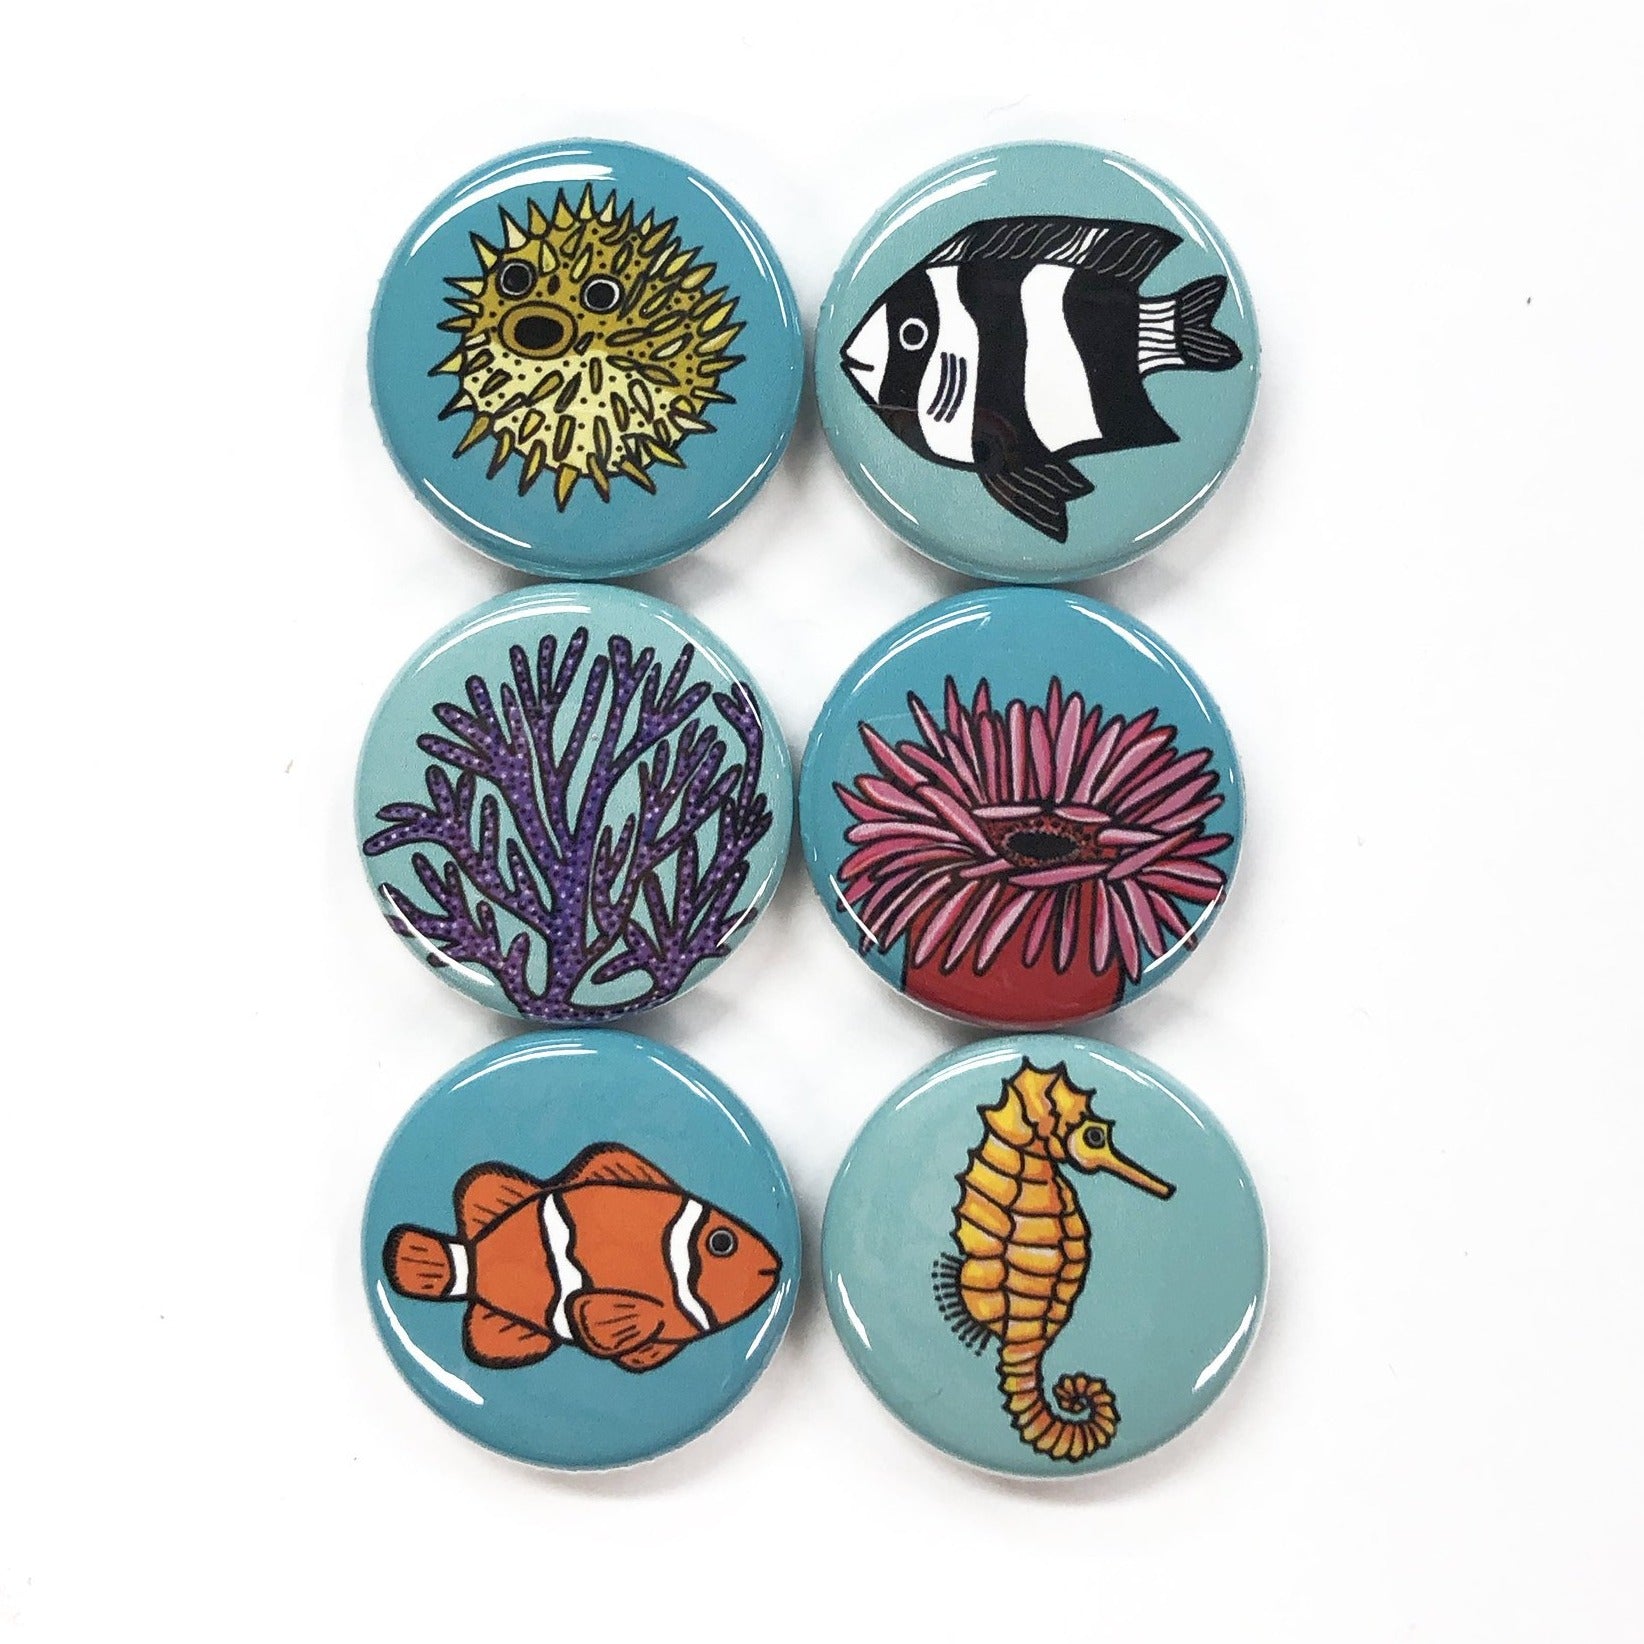 Coral Reef Fish Magnet or Pinback Button Set 1 inch Magnets